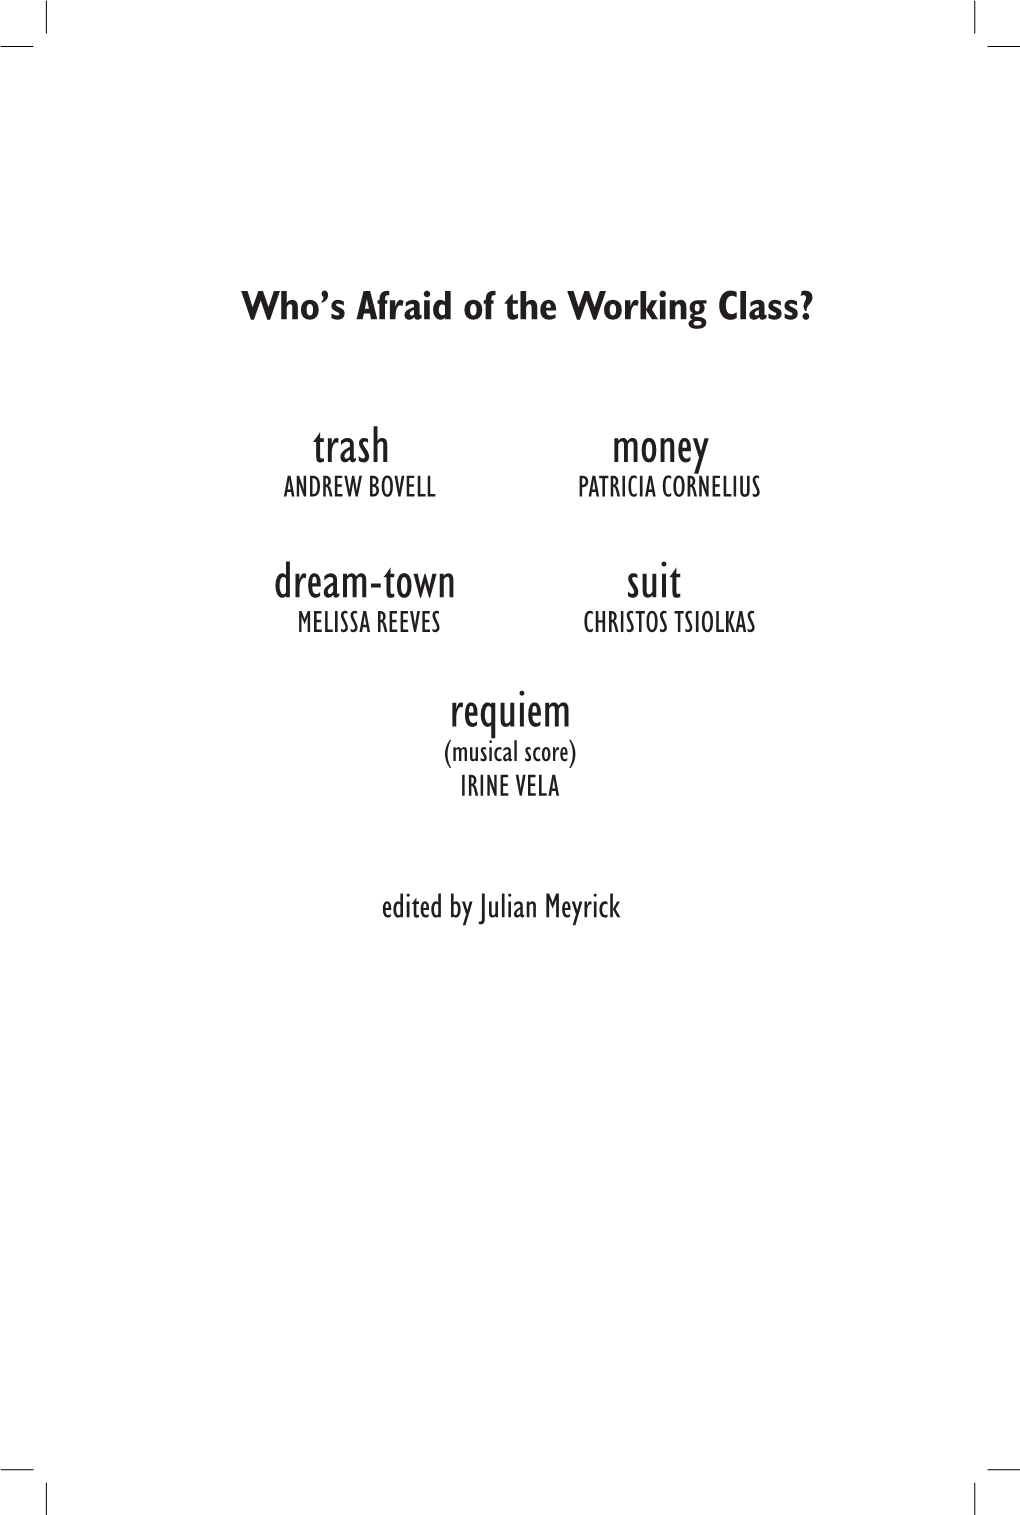 Who's Afraid of the Working Class?